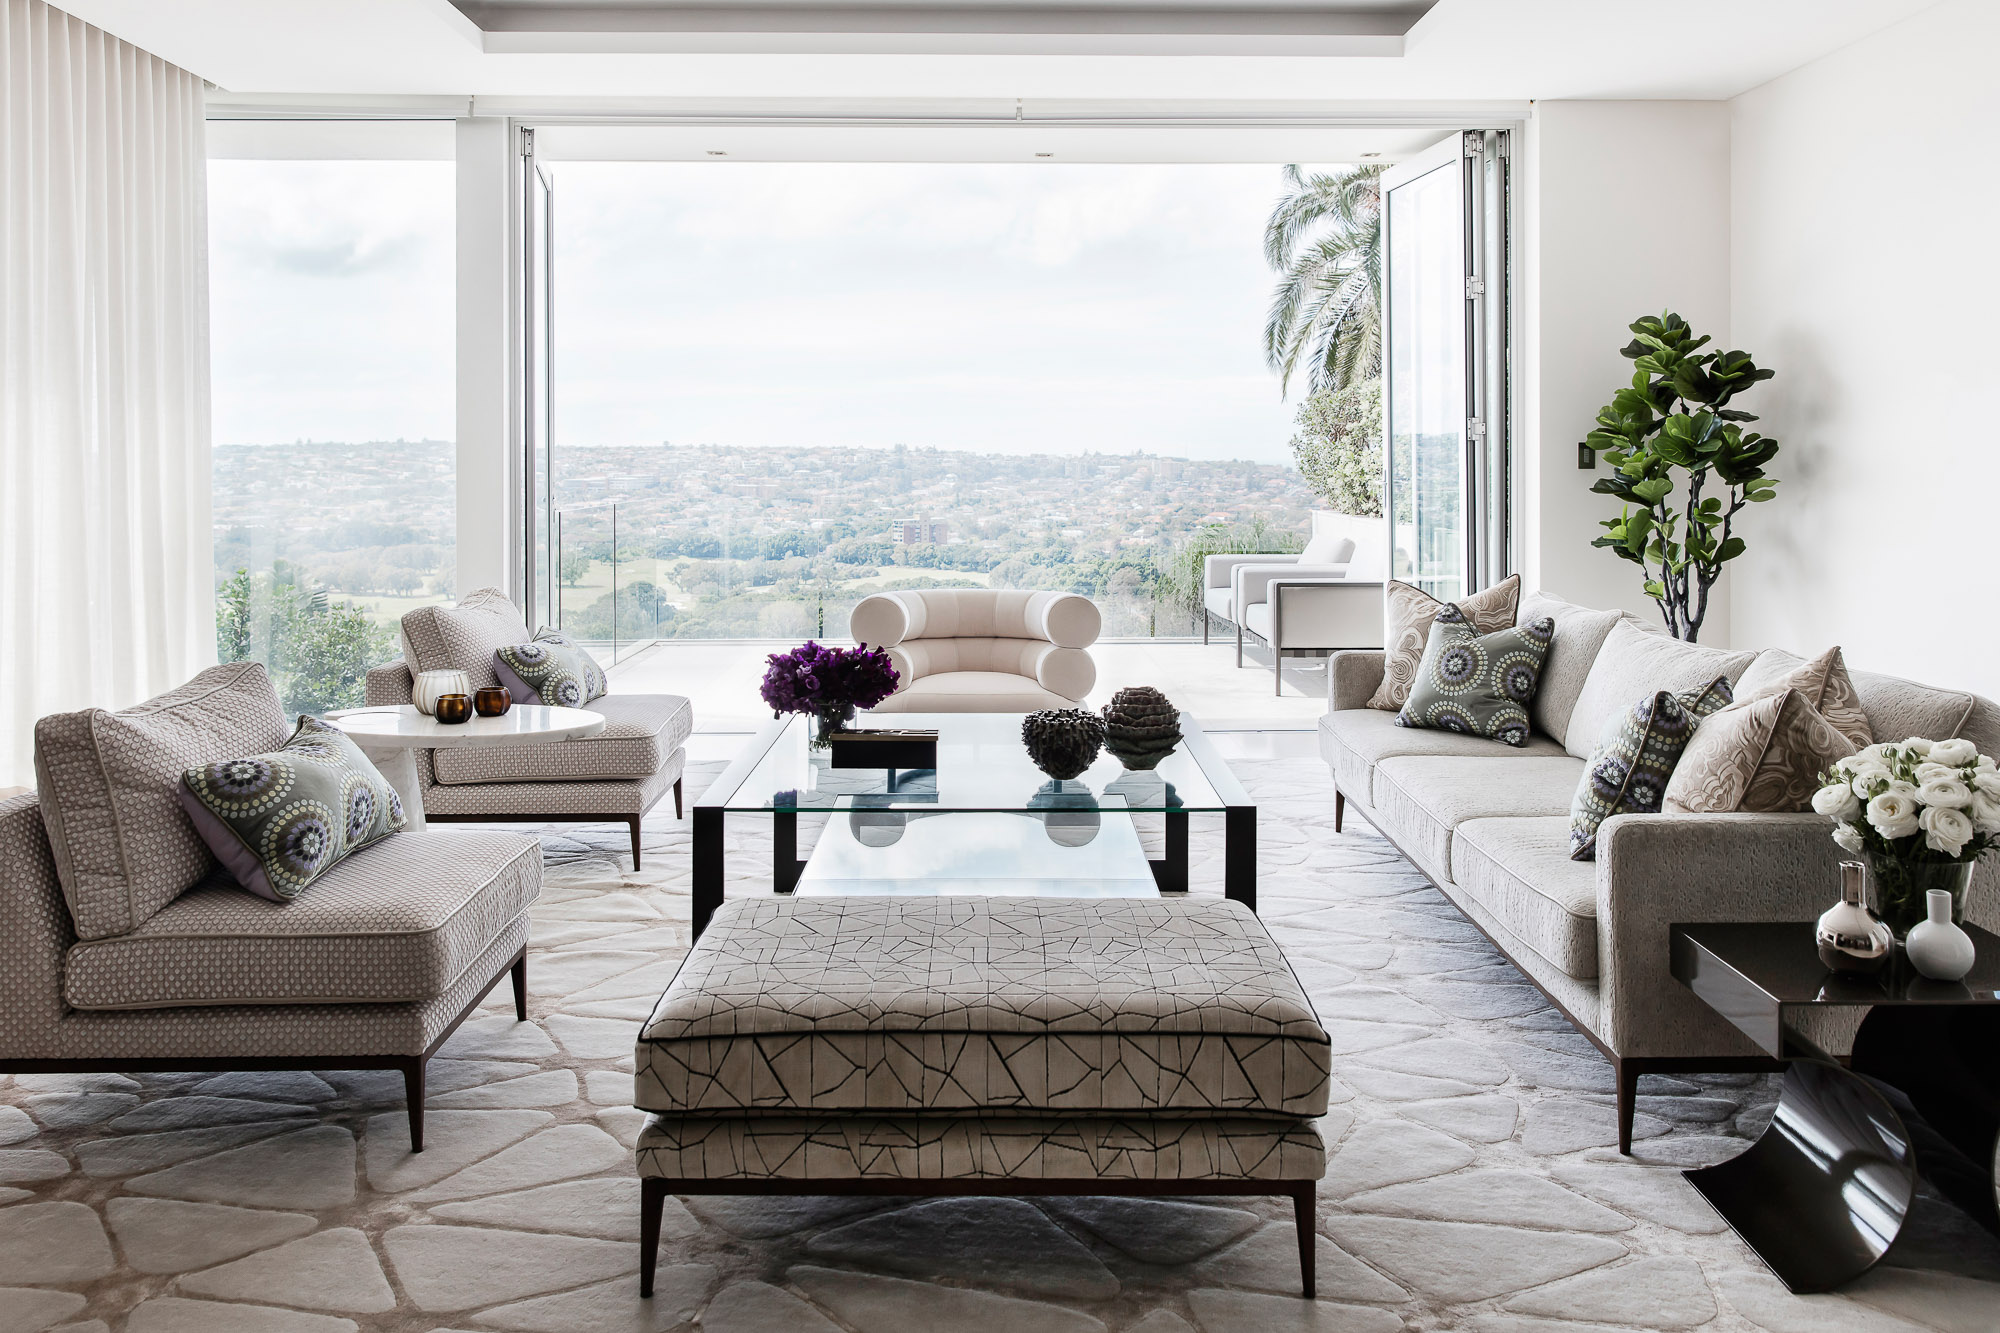 Bellevue Hill residence formal sitting room design with panoramic view, by Sydney interior designers, Brendan Wong Design